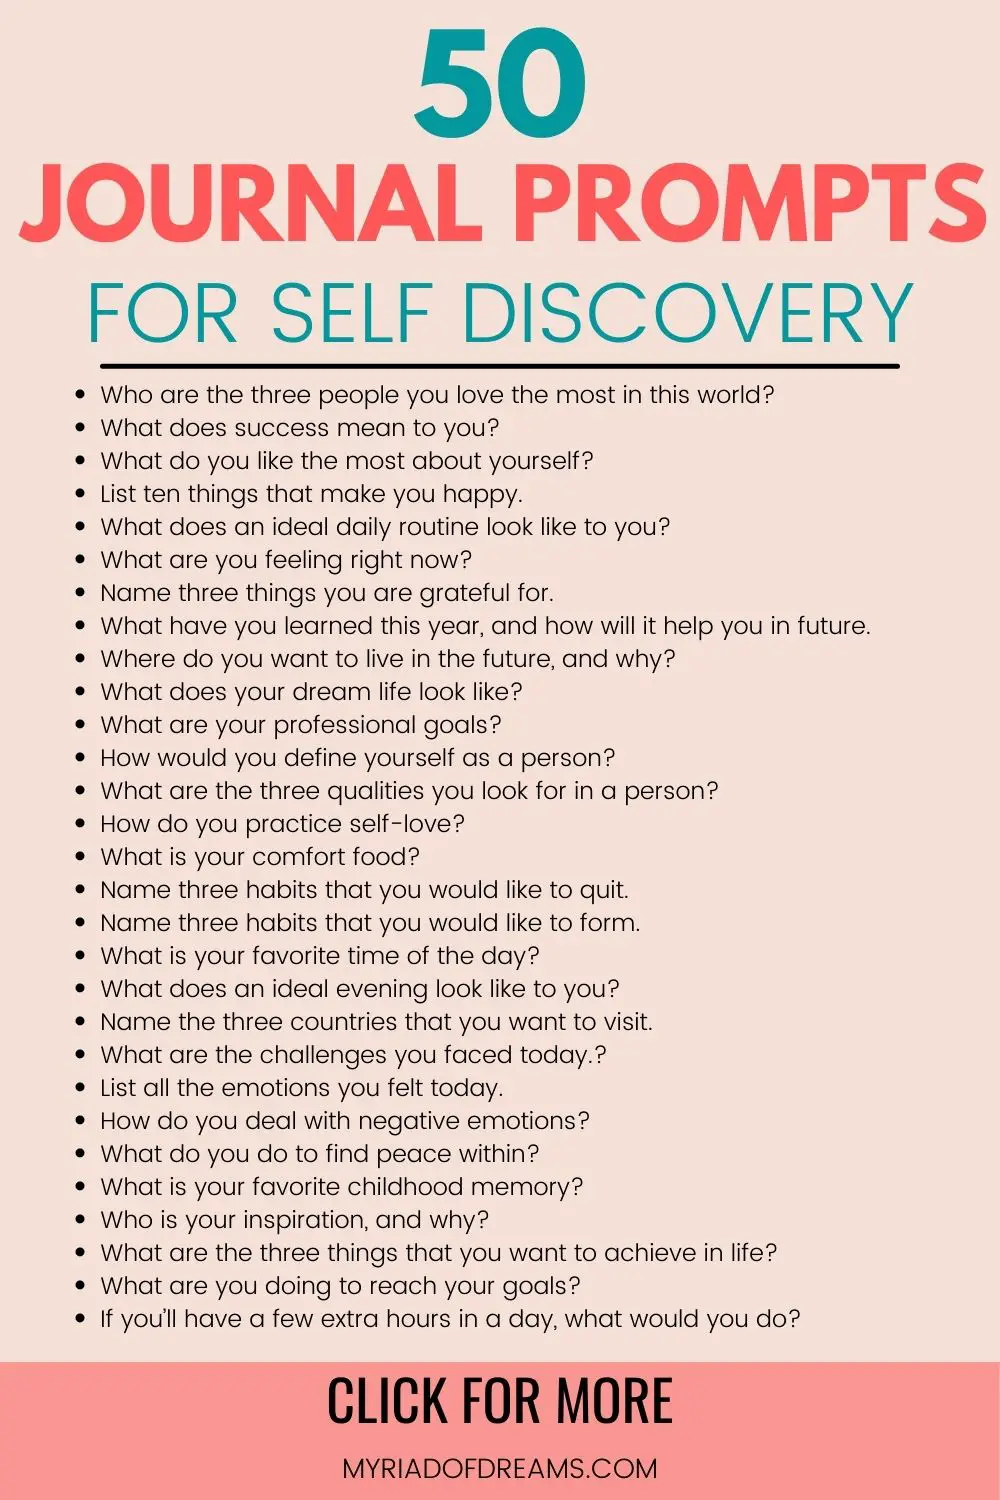 Want to start journaling but not getting ideas what to write about? Here are 50 self discovery journal prompts to help to understand your thoughts and feelings. Start your personal growth and self improvement journey with these journaling ideas. Journaling is a great way to take care of your mental health and a solid step towards self love. Journal writing prompts, journaling ideas, how to start journaling with journal prompts. #journalprompts #mentalhealth #personalgrowth #selfcare 